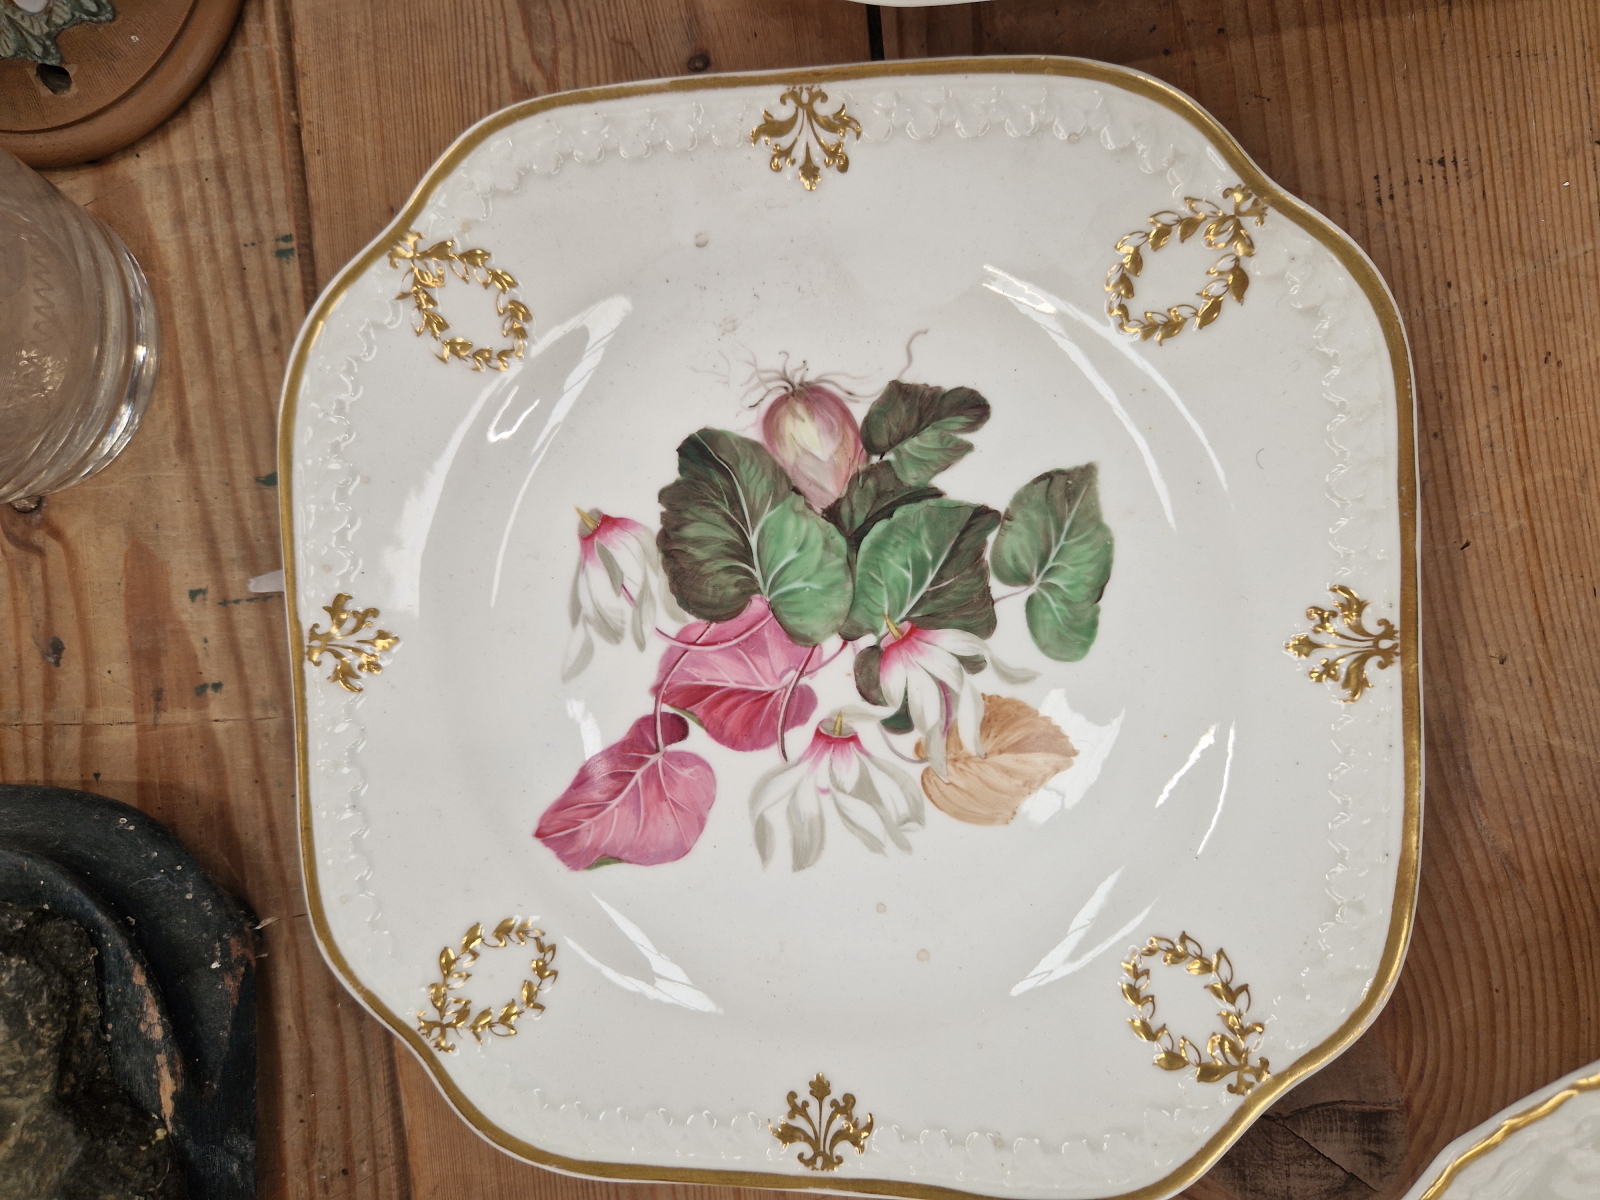 A FINE EARLY 19th C. PORCELAIN DESSERT SERVICE, HAND PAINTED WITH NAMED FLORAL BOTANICAL SPECIMENS - Image 30 of 58